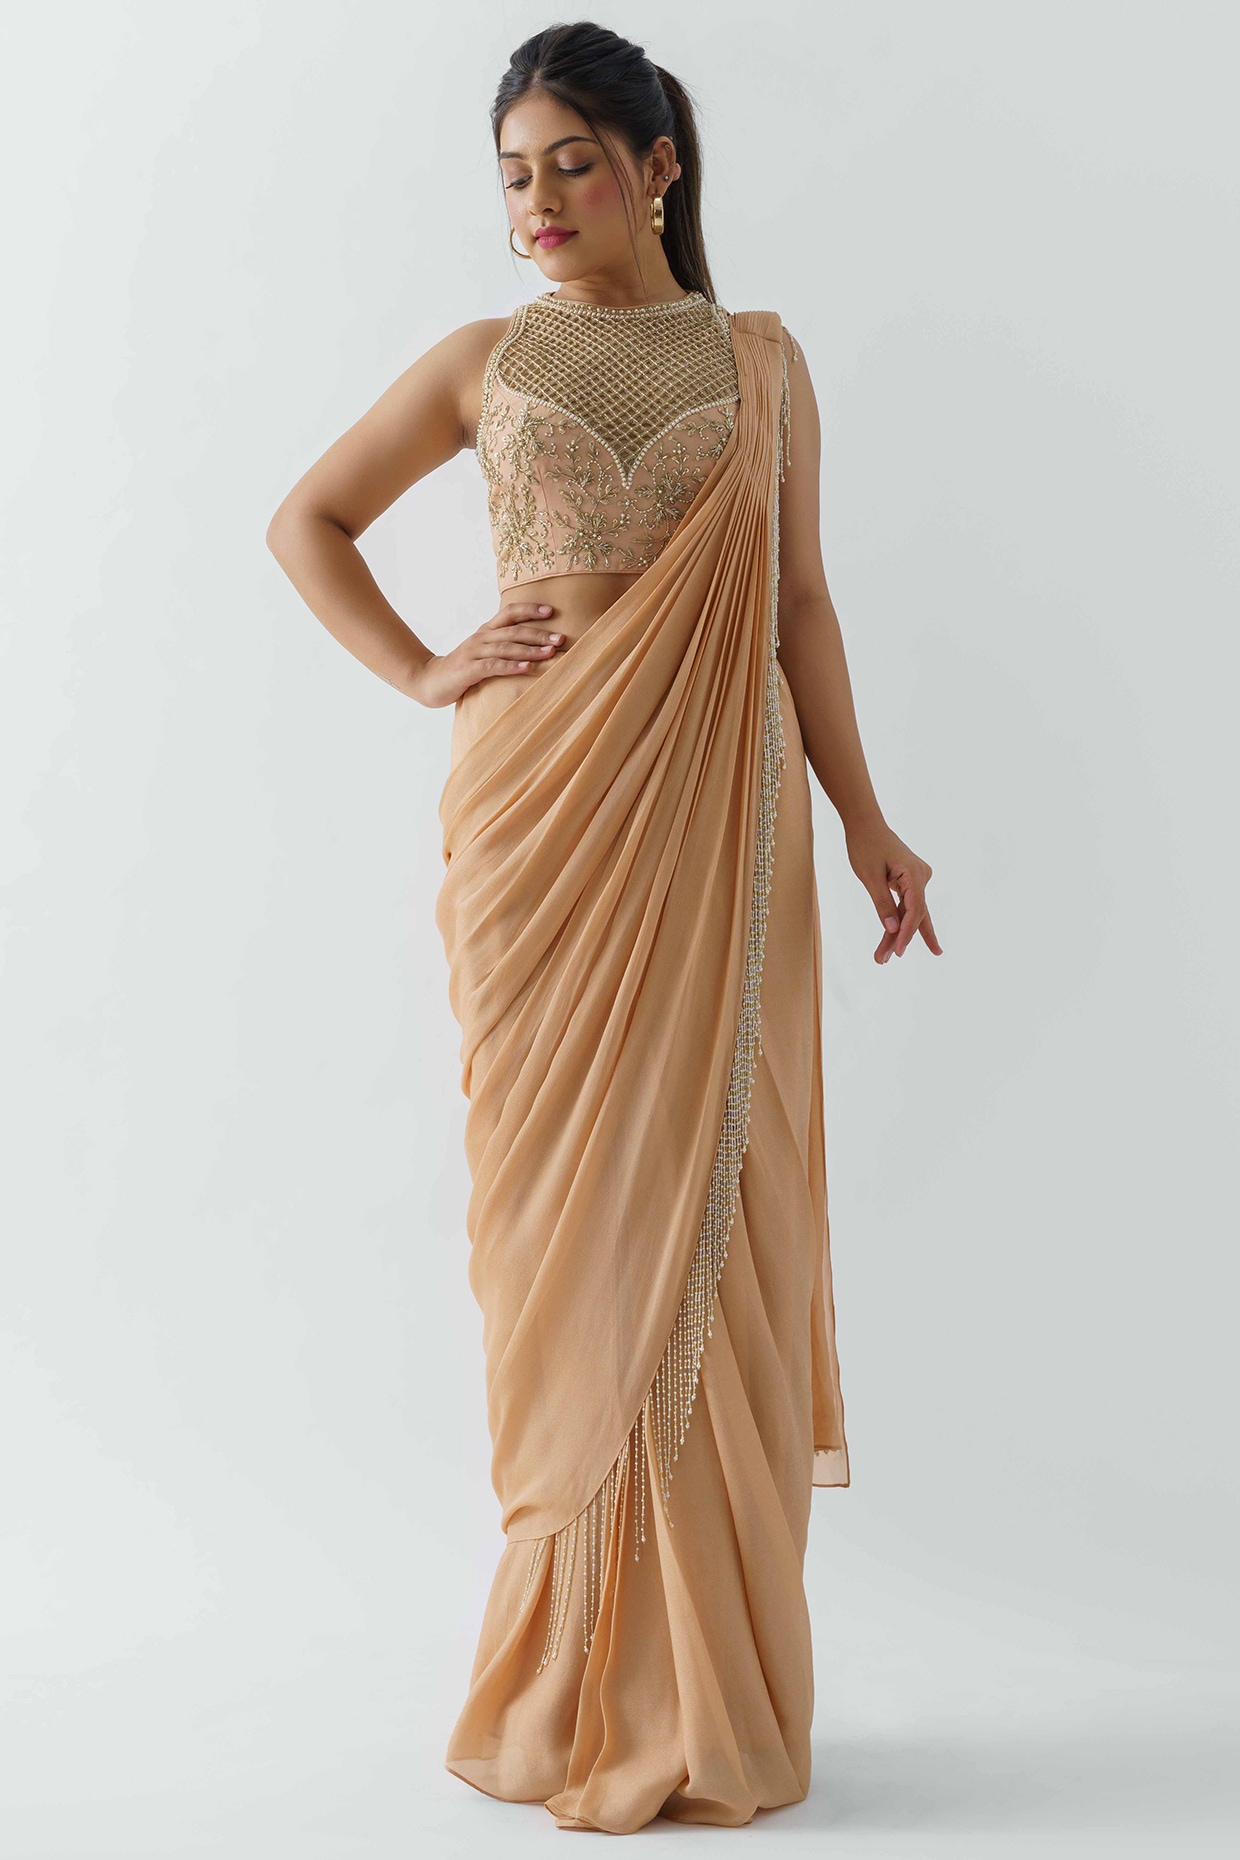 Buy Ricka Gauba Embroidered Pre-Stitched Saree For Women Available online  at ScrollnShops